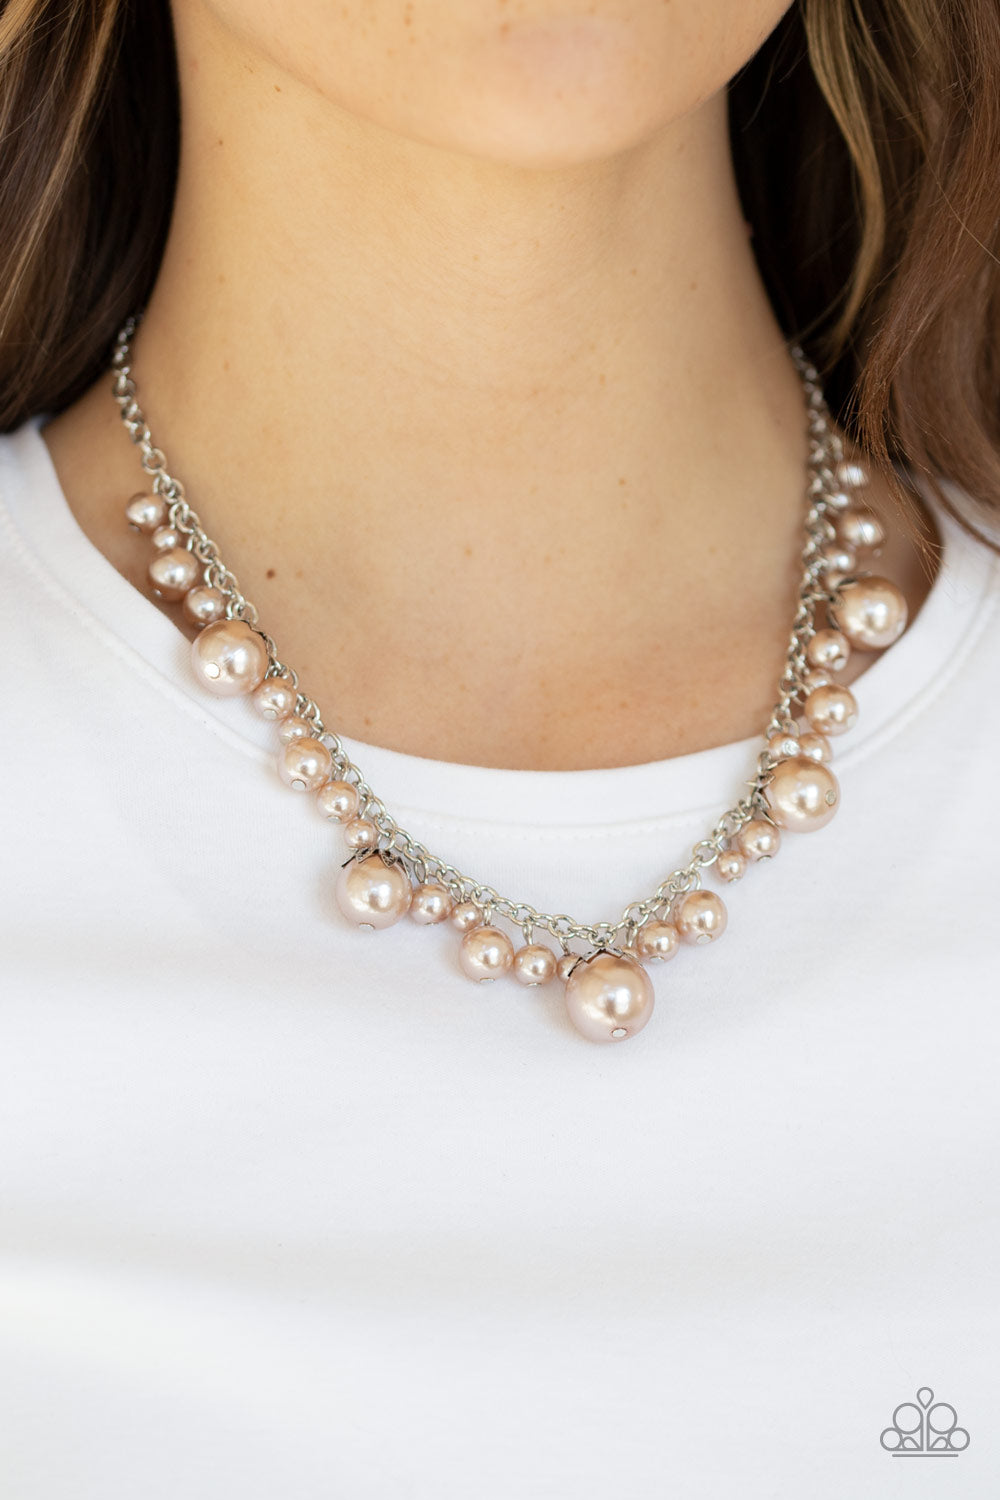 Paparazzi Necklace ~ Uptown Pearls - Brown Pearl Necklace